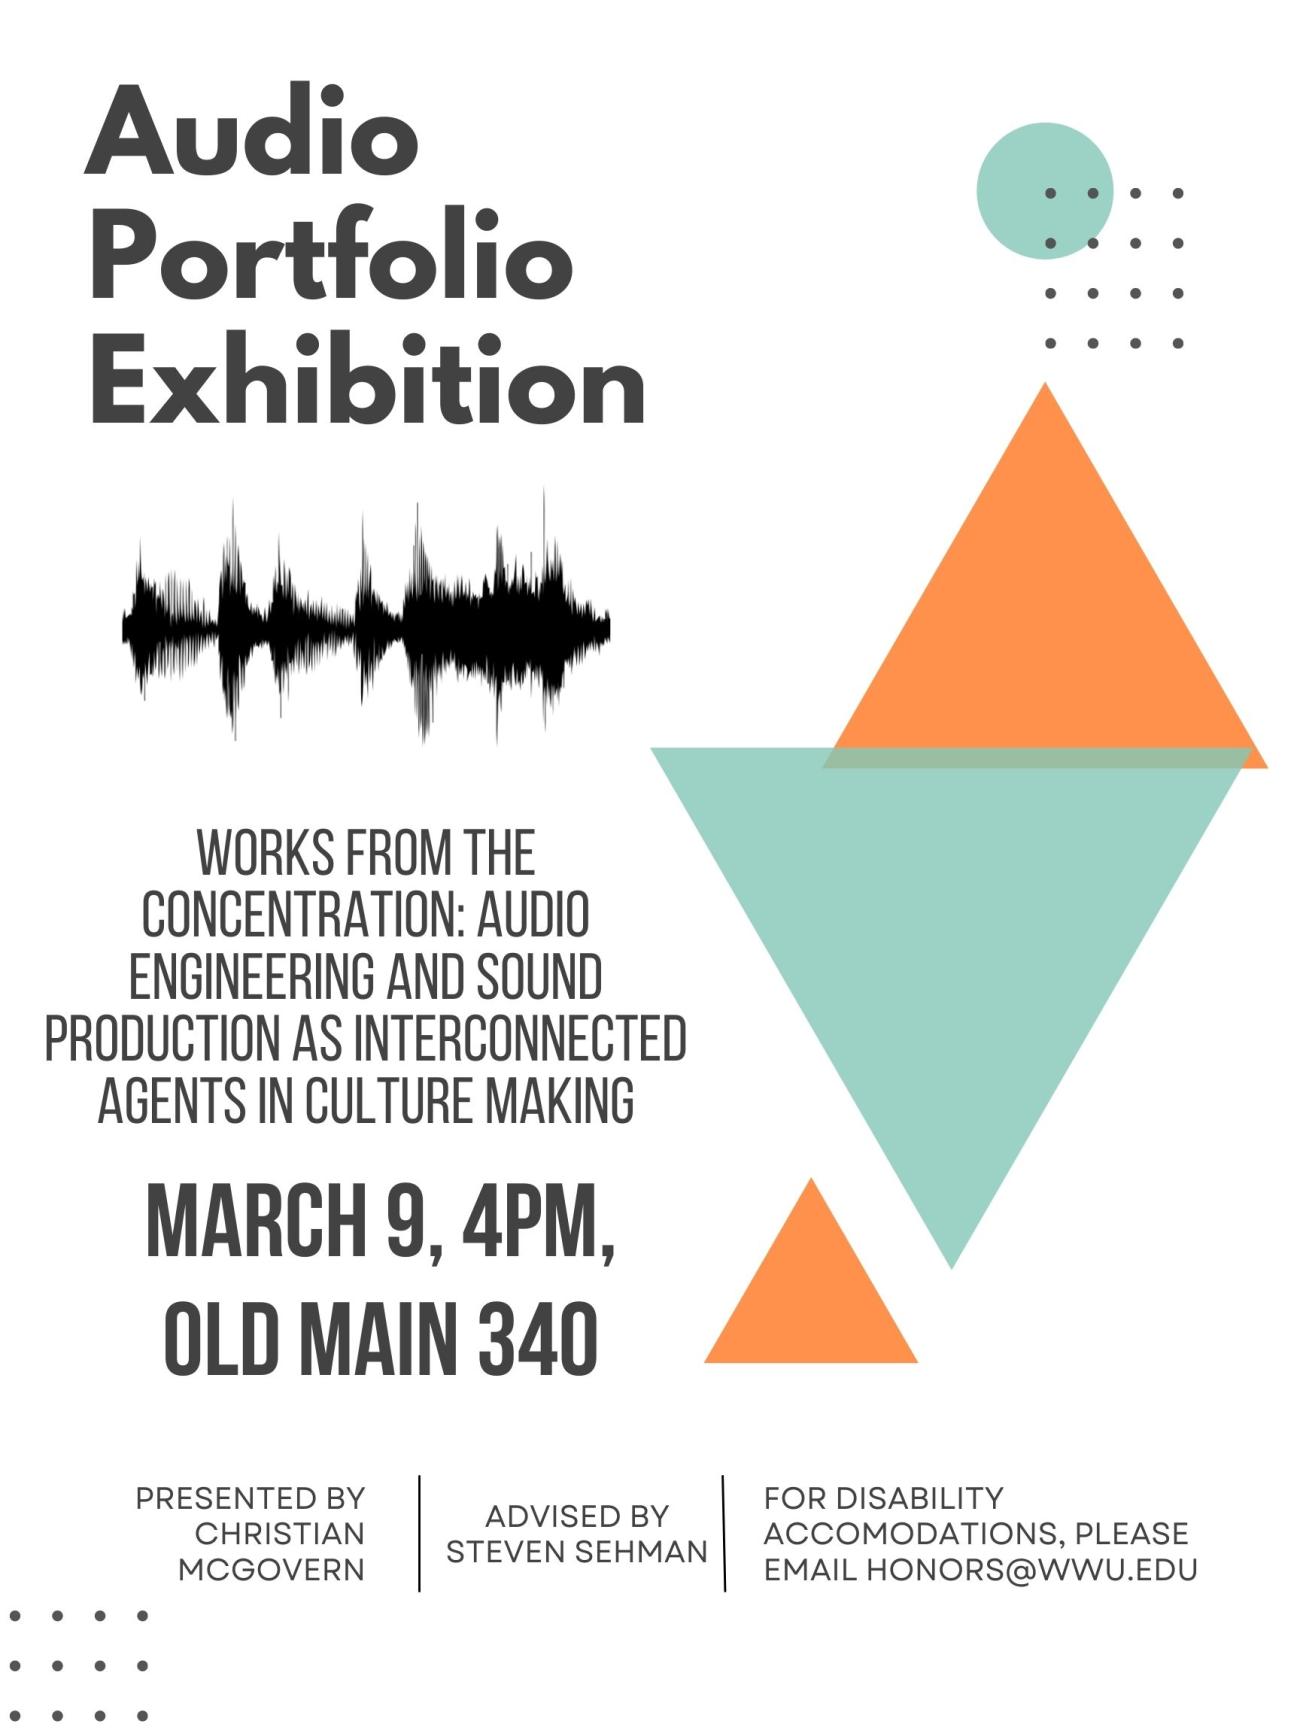 A white poster with orange and blue triangles and a photo of an audio file. The text reads "Audio Portfolio Exhibition. Works from the concentration: audio engineering and sound production as interconnected agents in culture making. March 9, 4PM, Old Main 340. Presented by Christian McGovern. Advised by Steven Sehman. For Disability Accomodations email honors@wwu.edu."